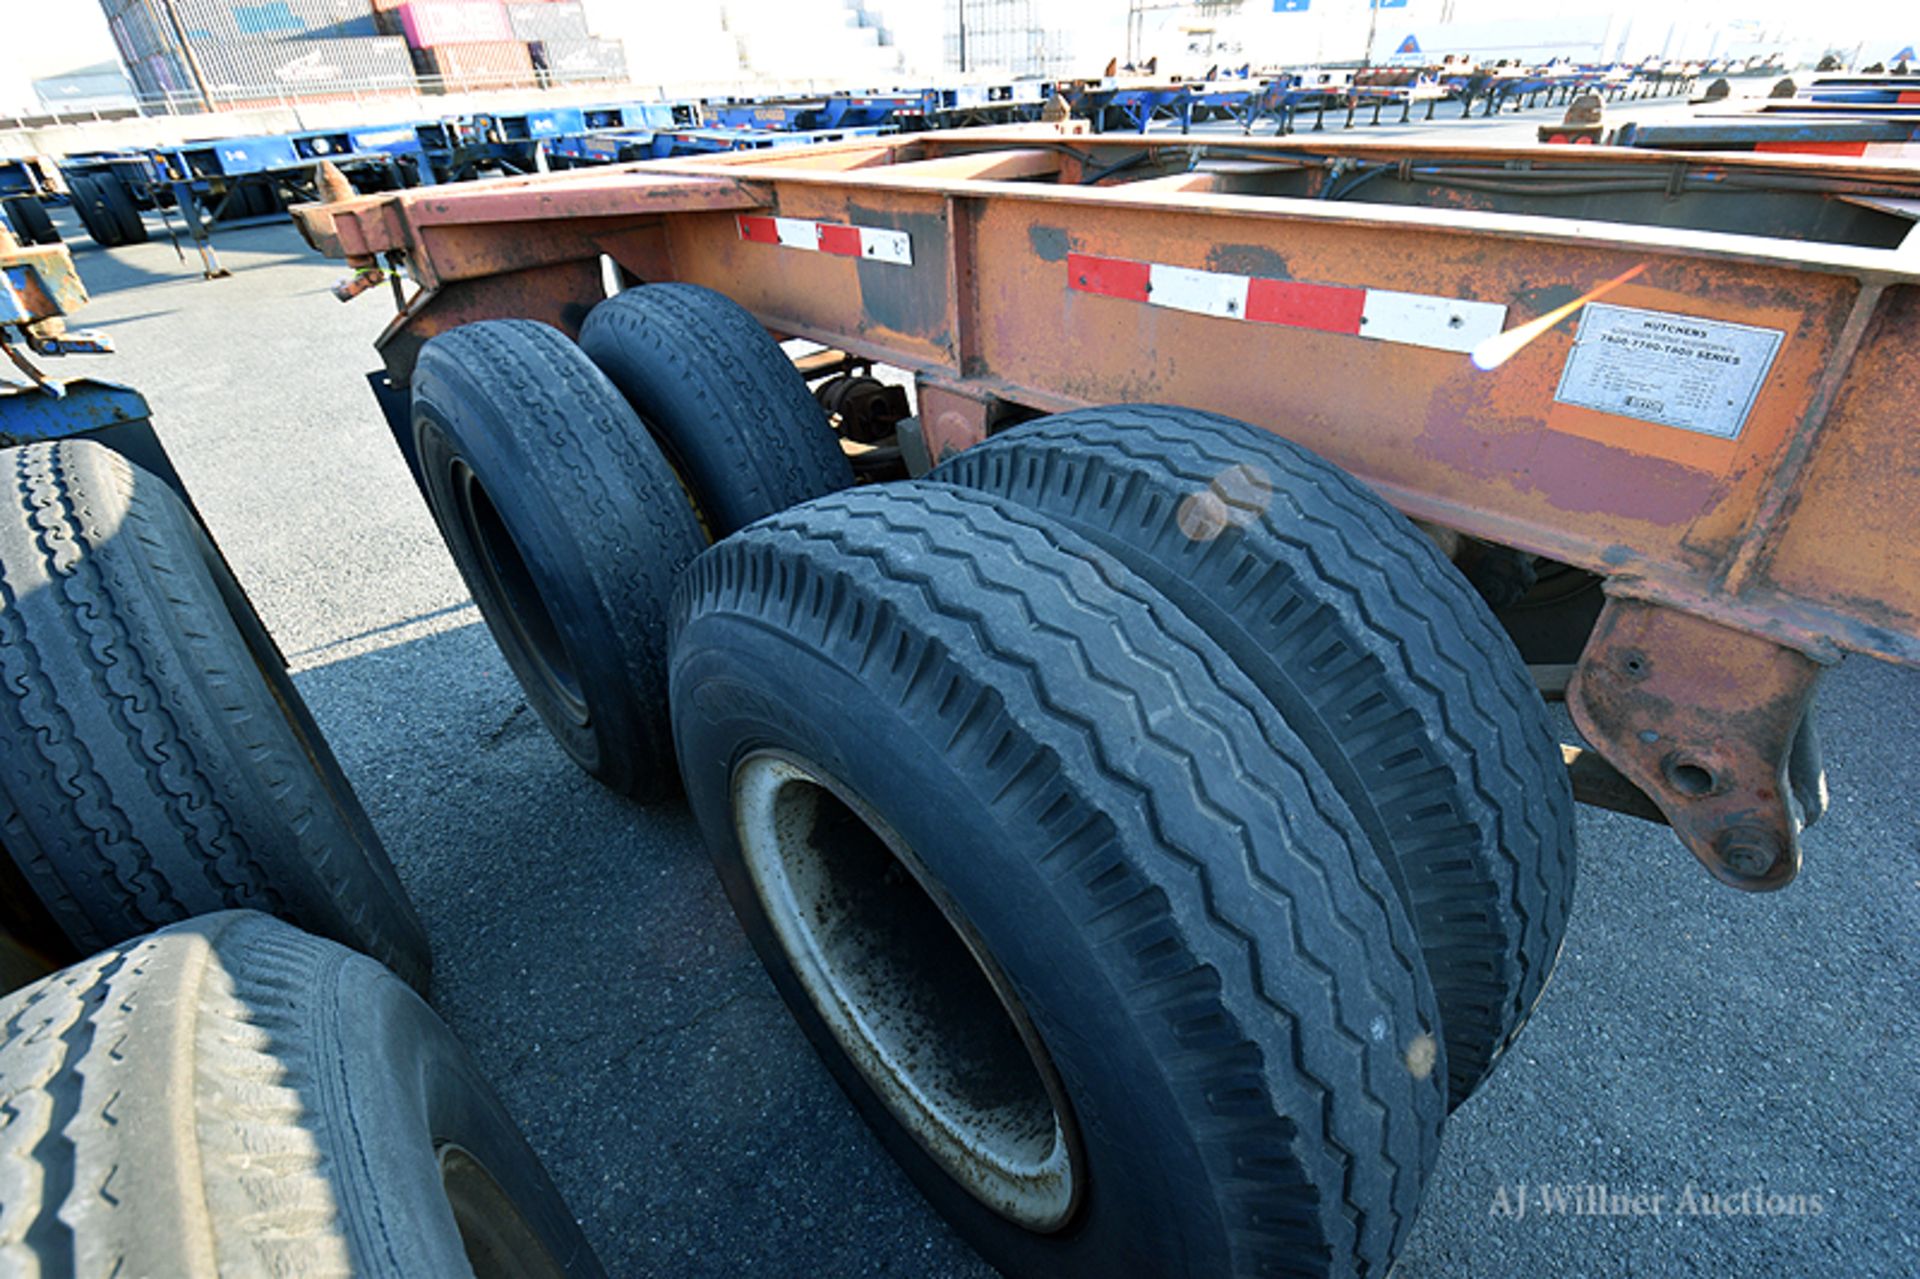 1987 Hyundai 40'-0 container chassis VIN 145C412S5HL009744 (Unit #9000139). - Image 3 of 5